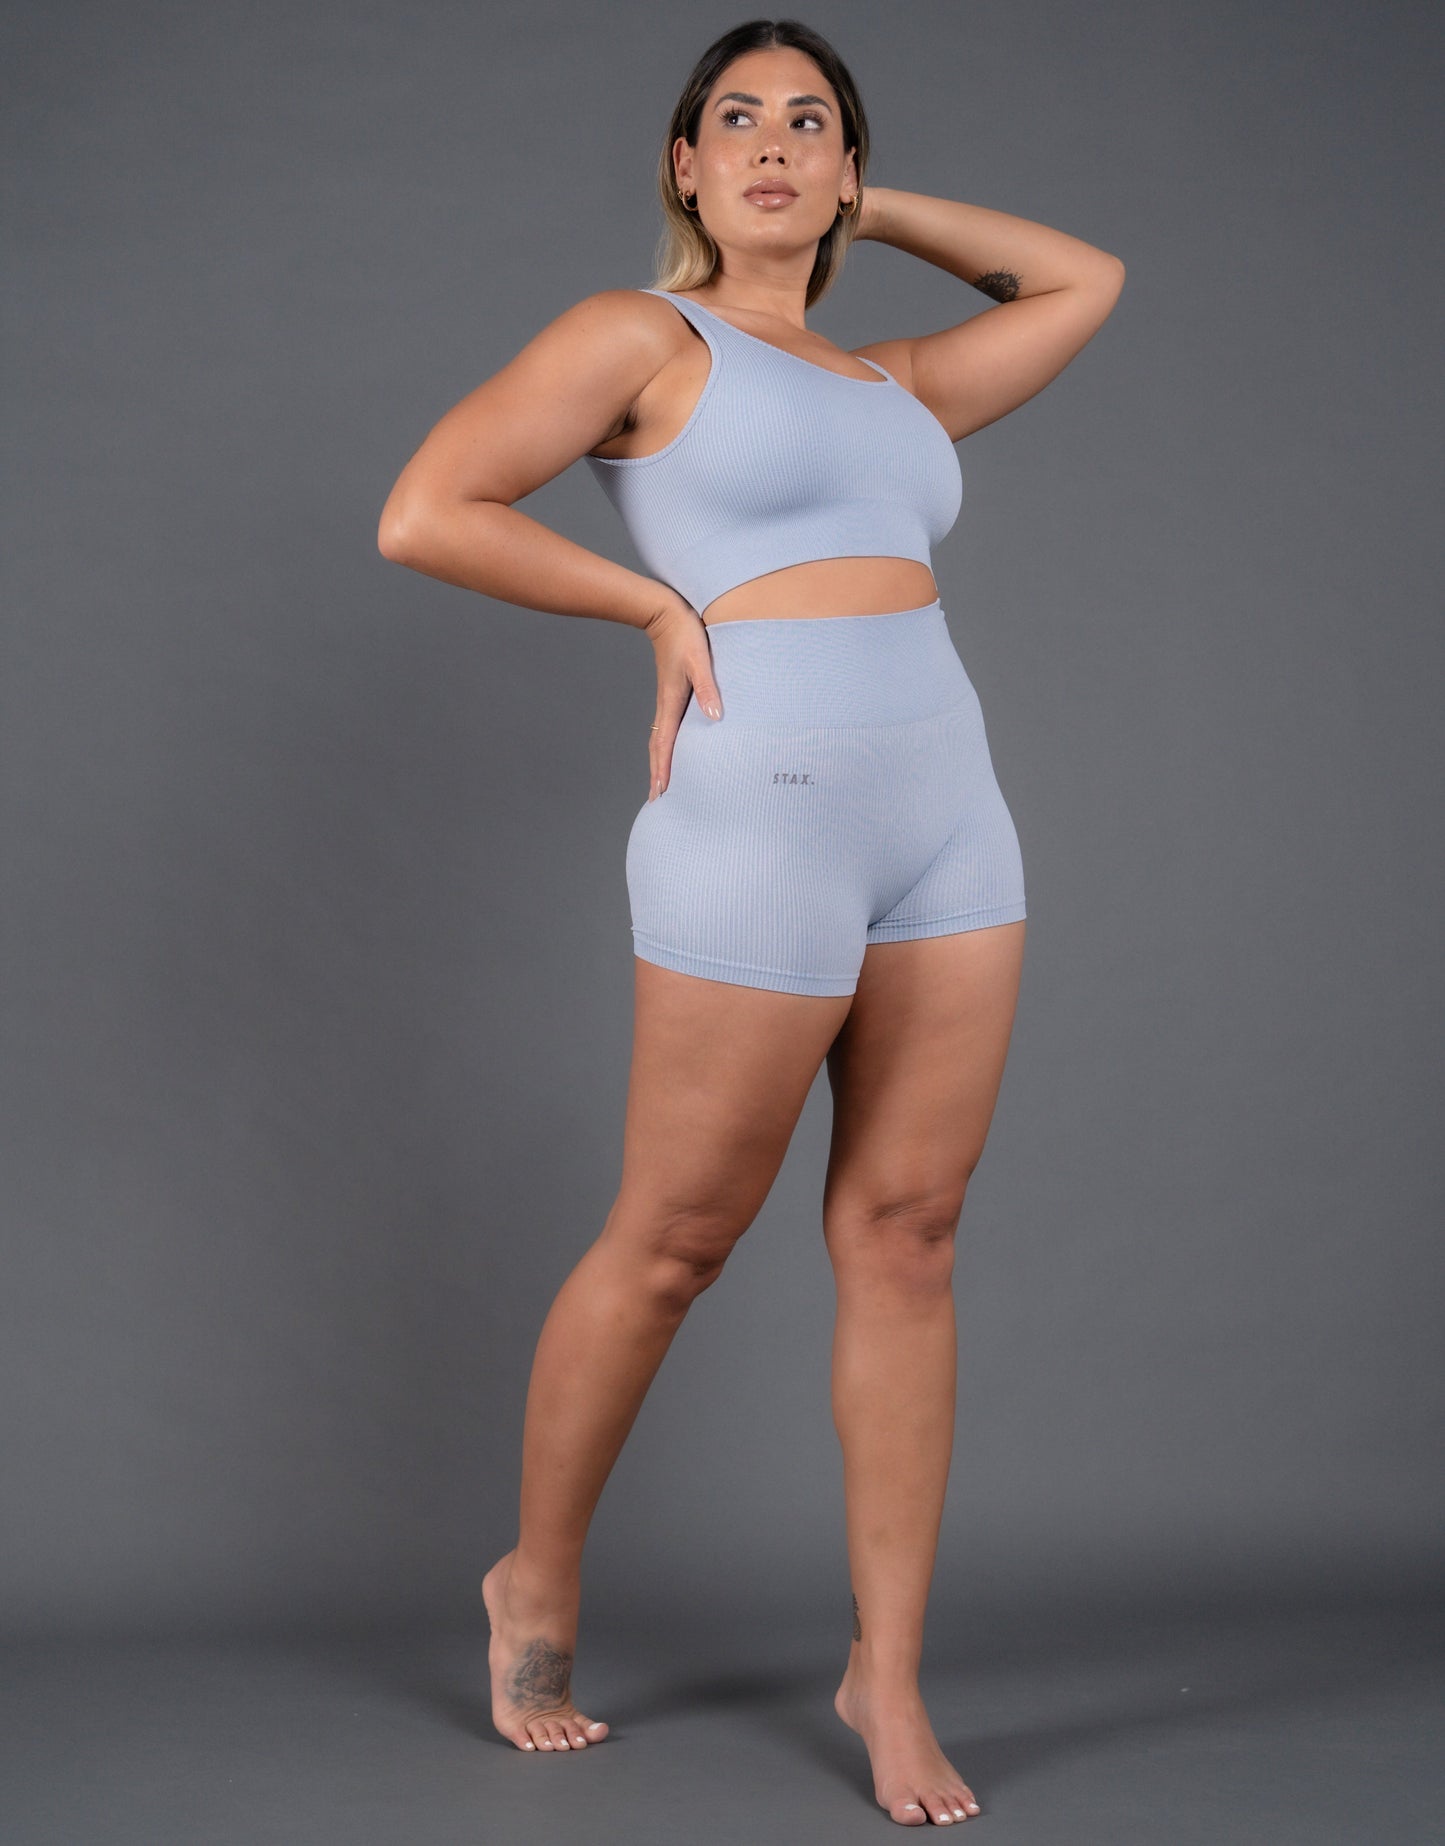 STAX. Premium Seamless V5 Low Back Crop Lounge - Arion (Blue)